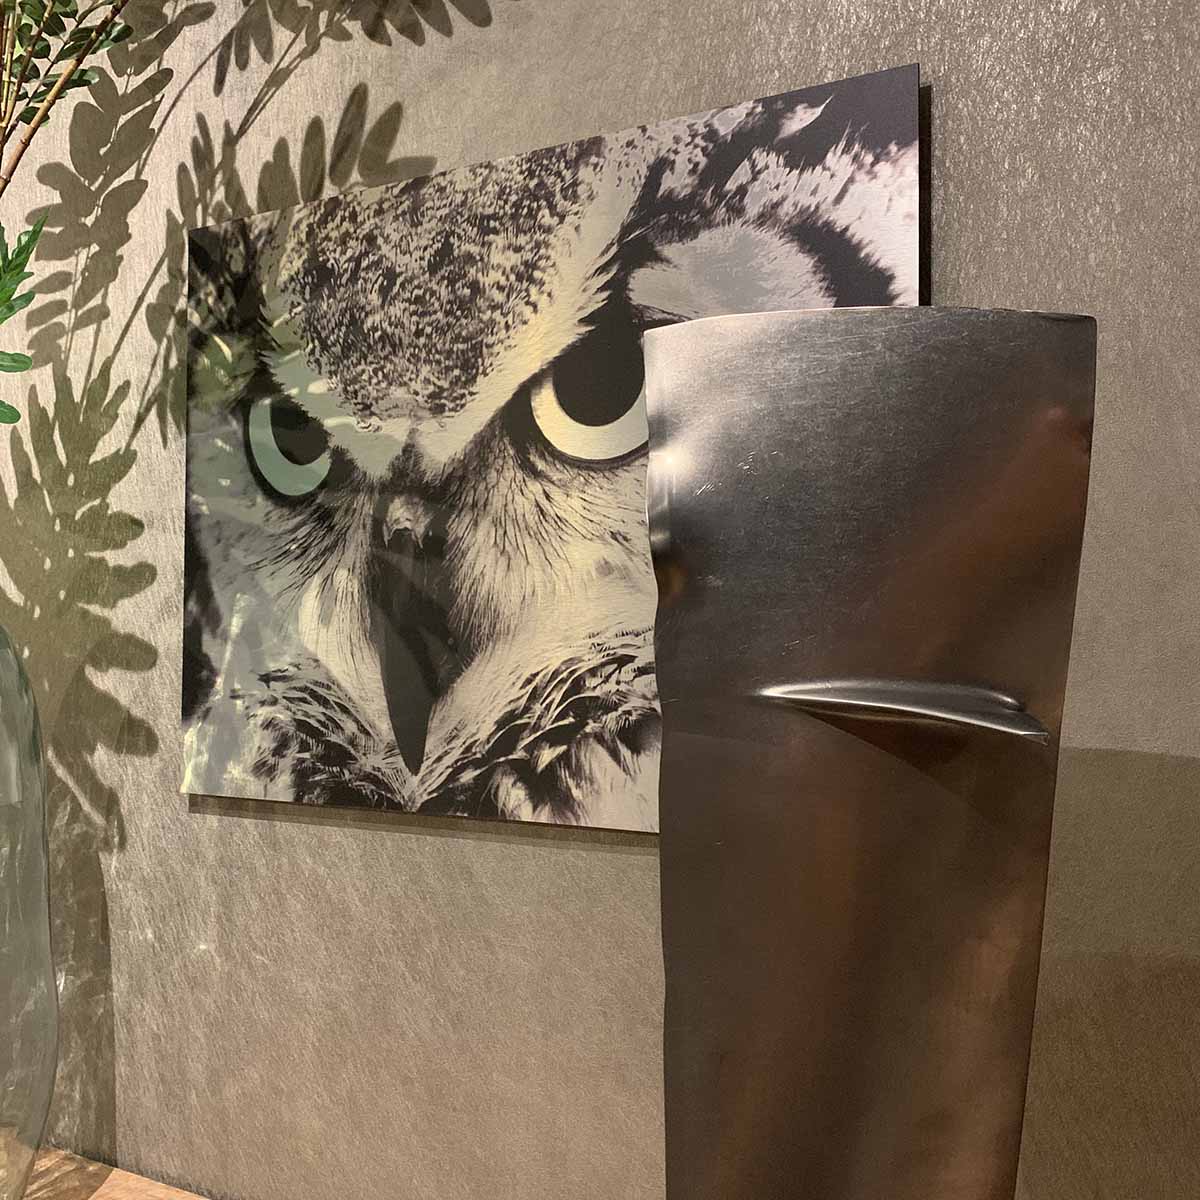 Top side of a Pratt & Whitney PW4000 engine fan blade in front of a photo of an owl.